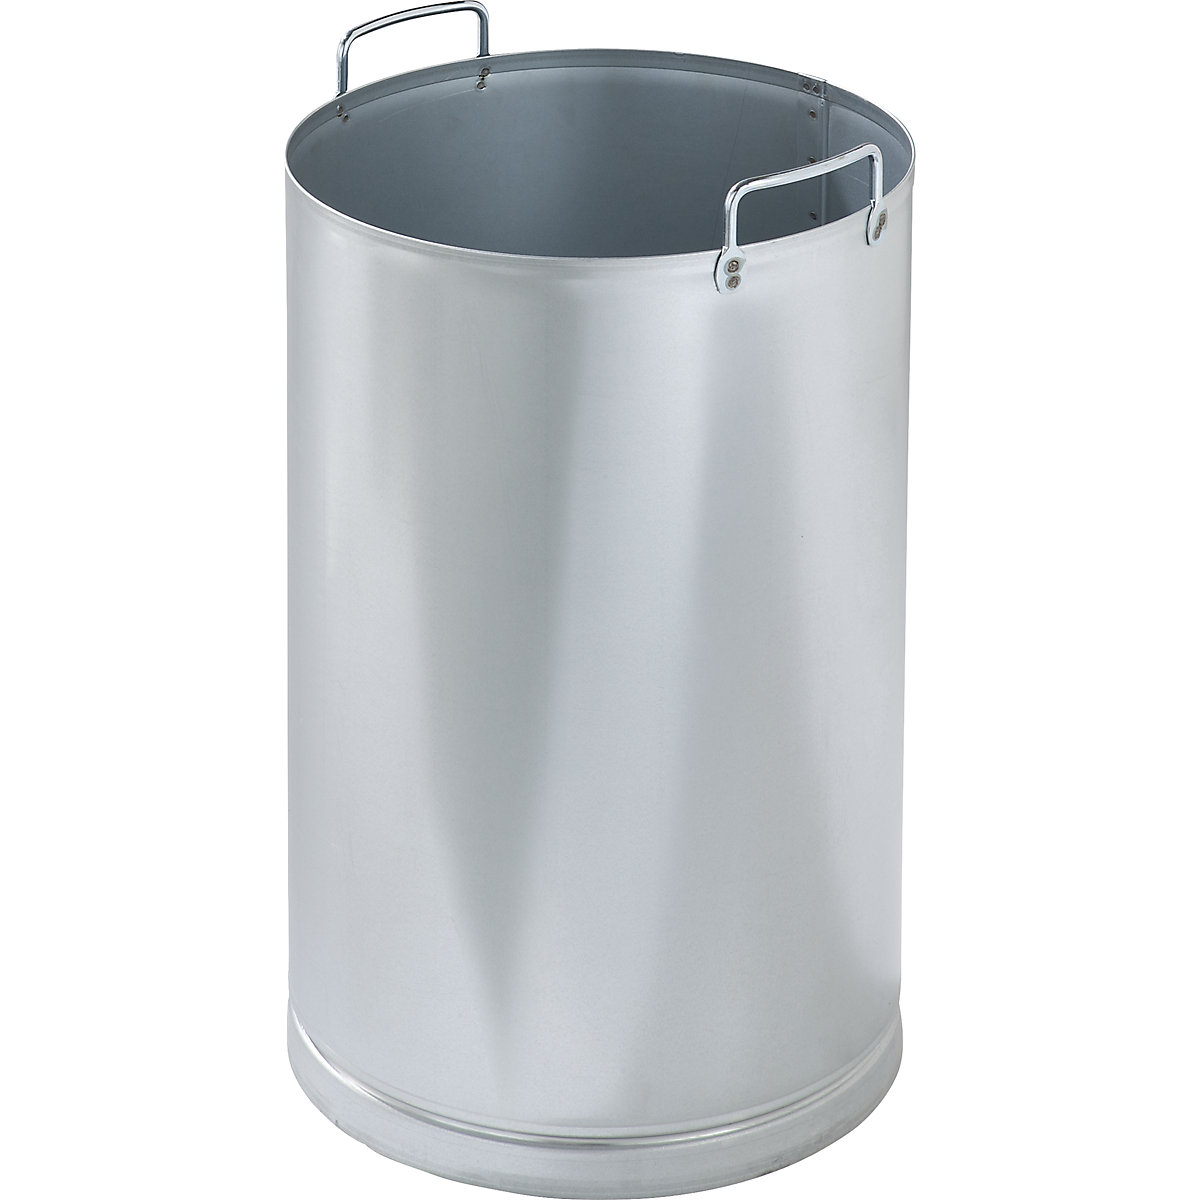 Zinc plated inner container - VAR